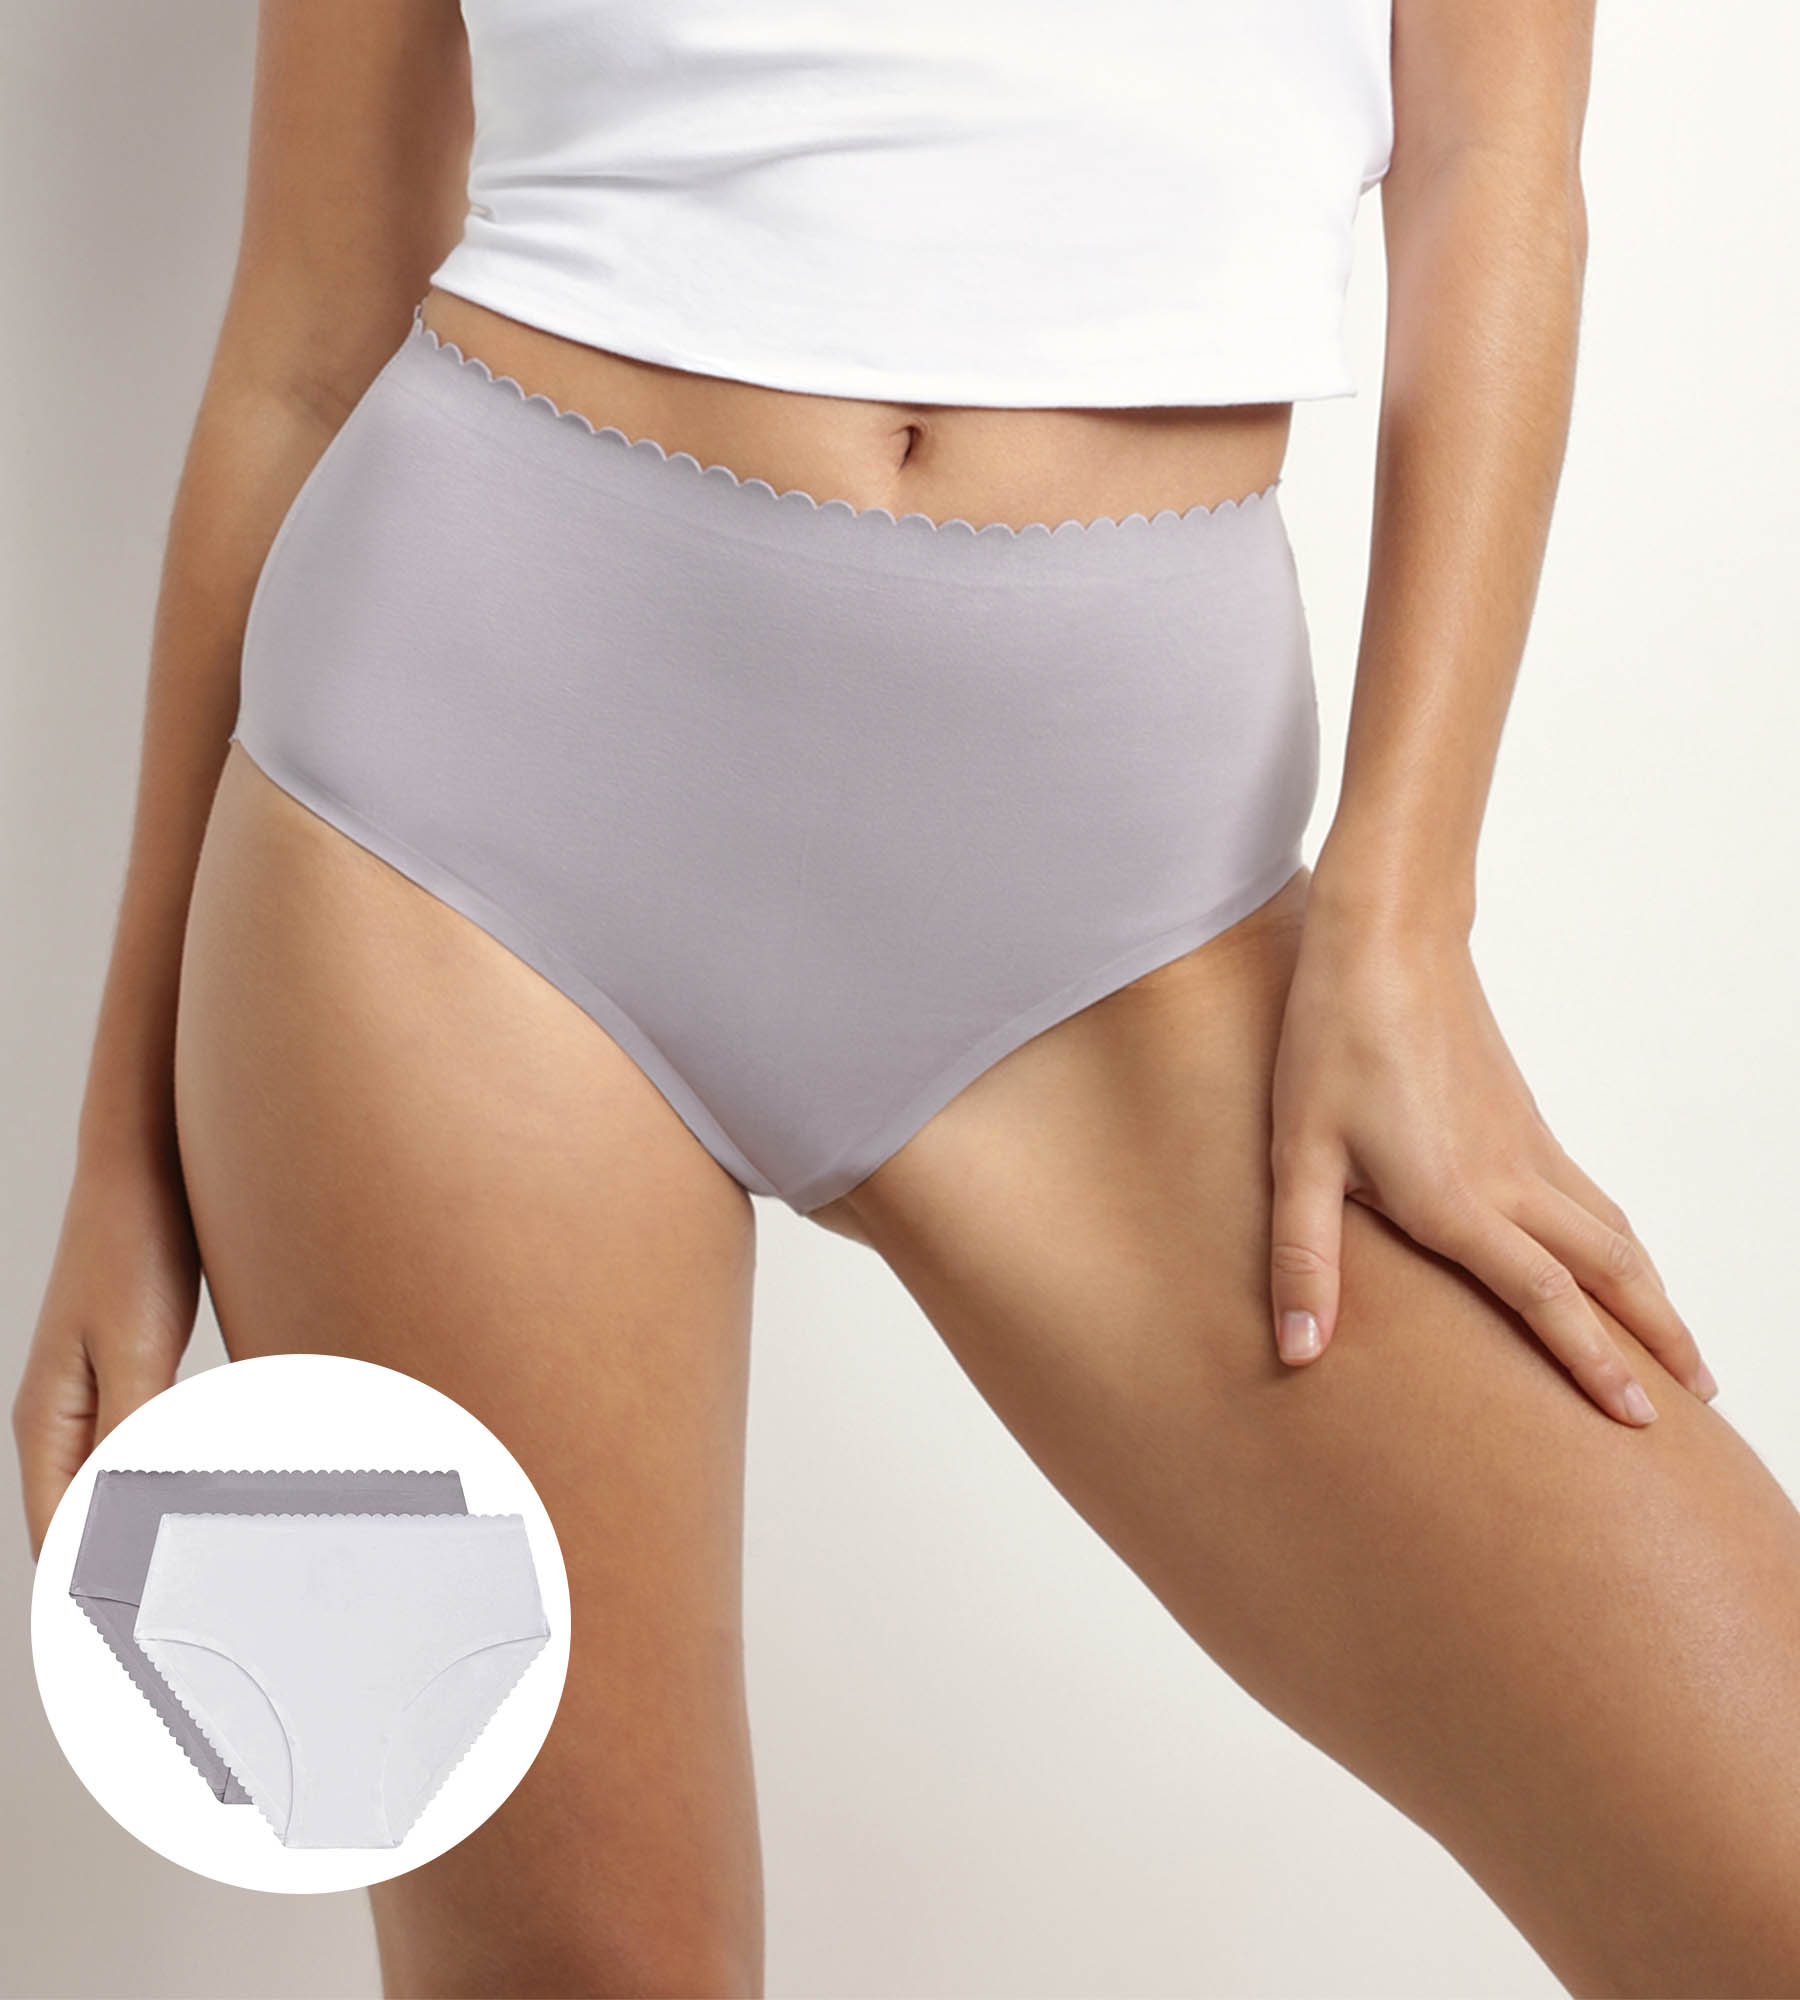 Pack of 2 women's briefs in stretch cotton in White and Gray Body